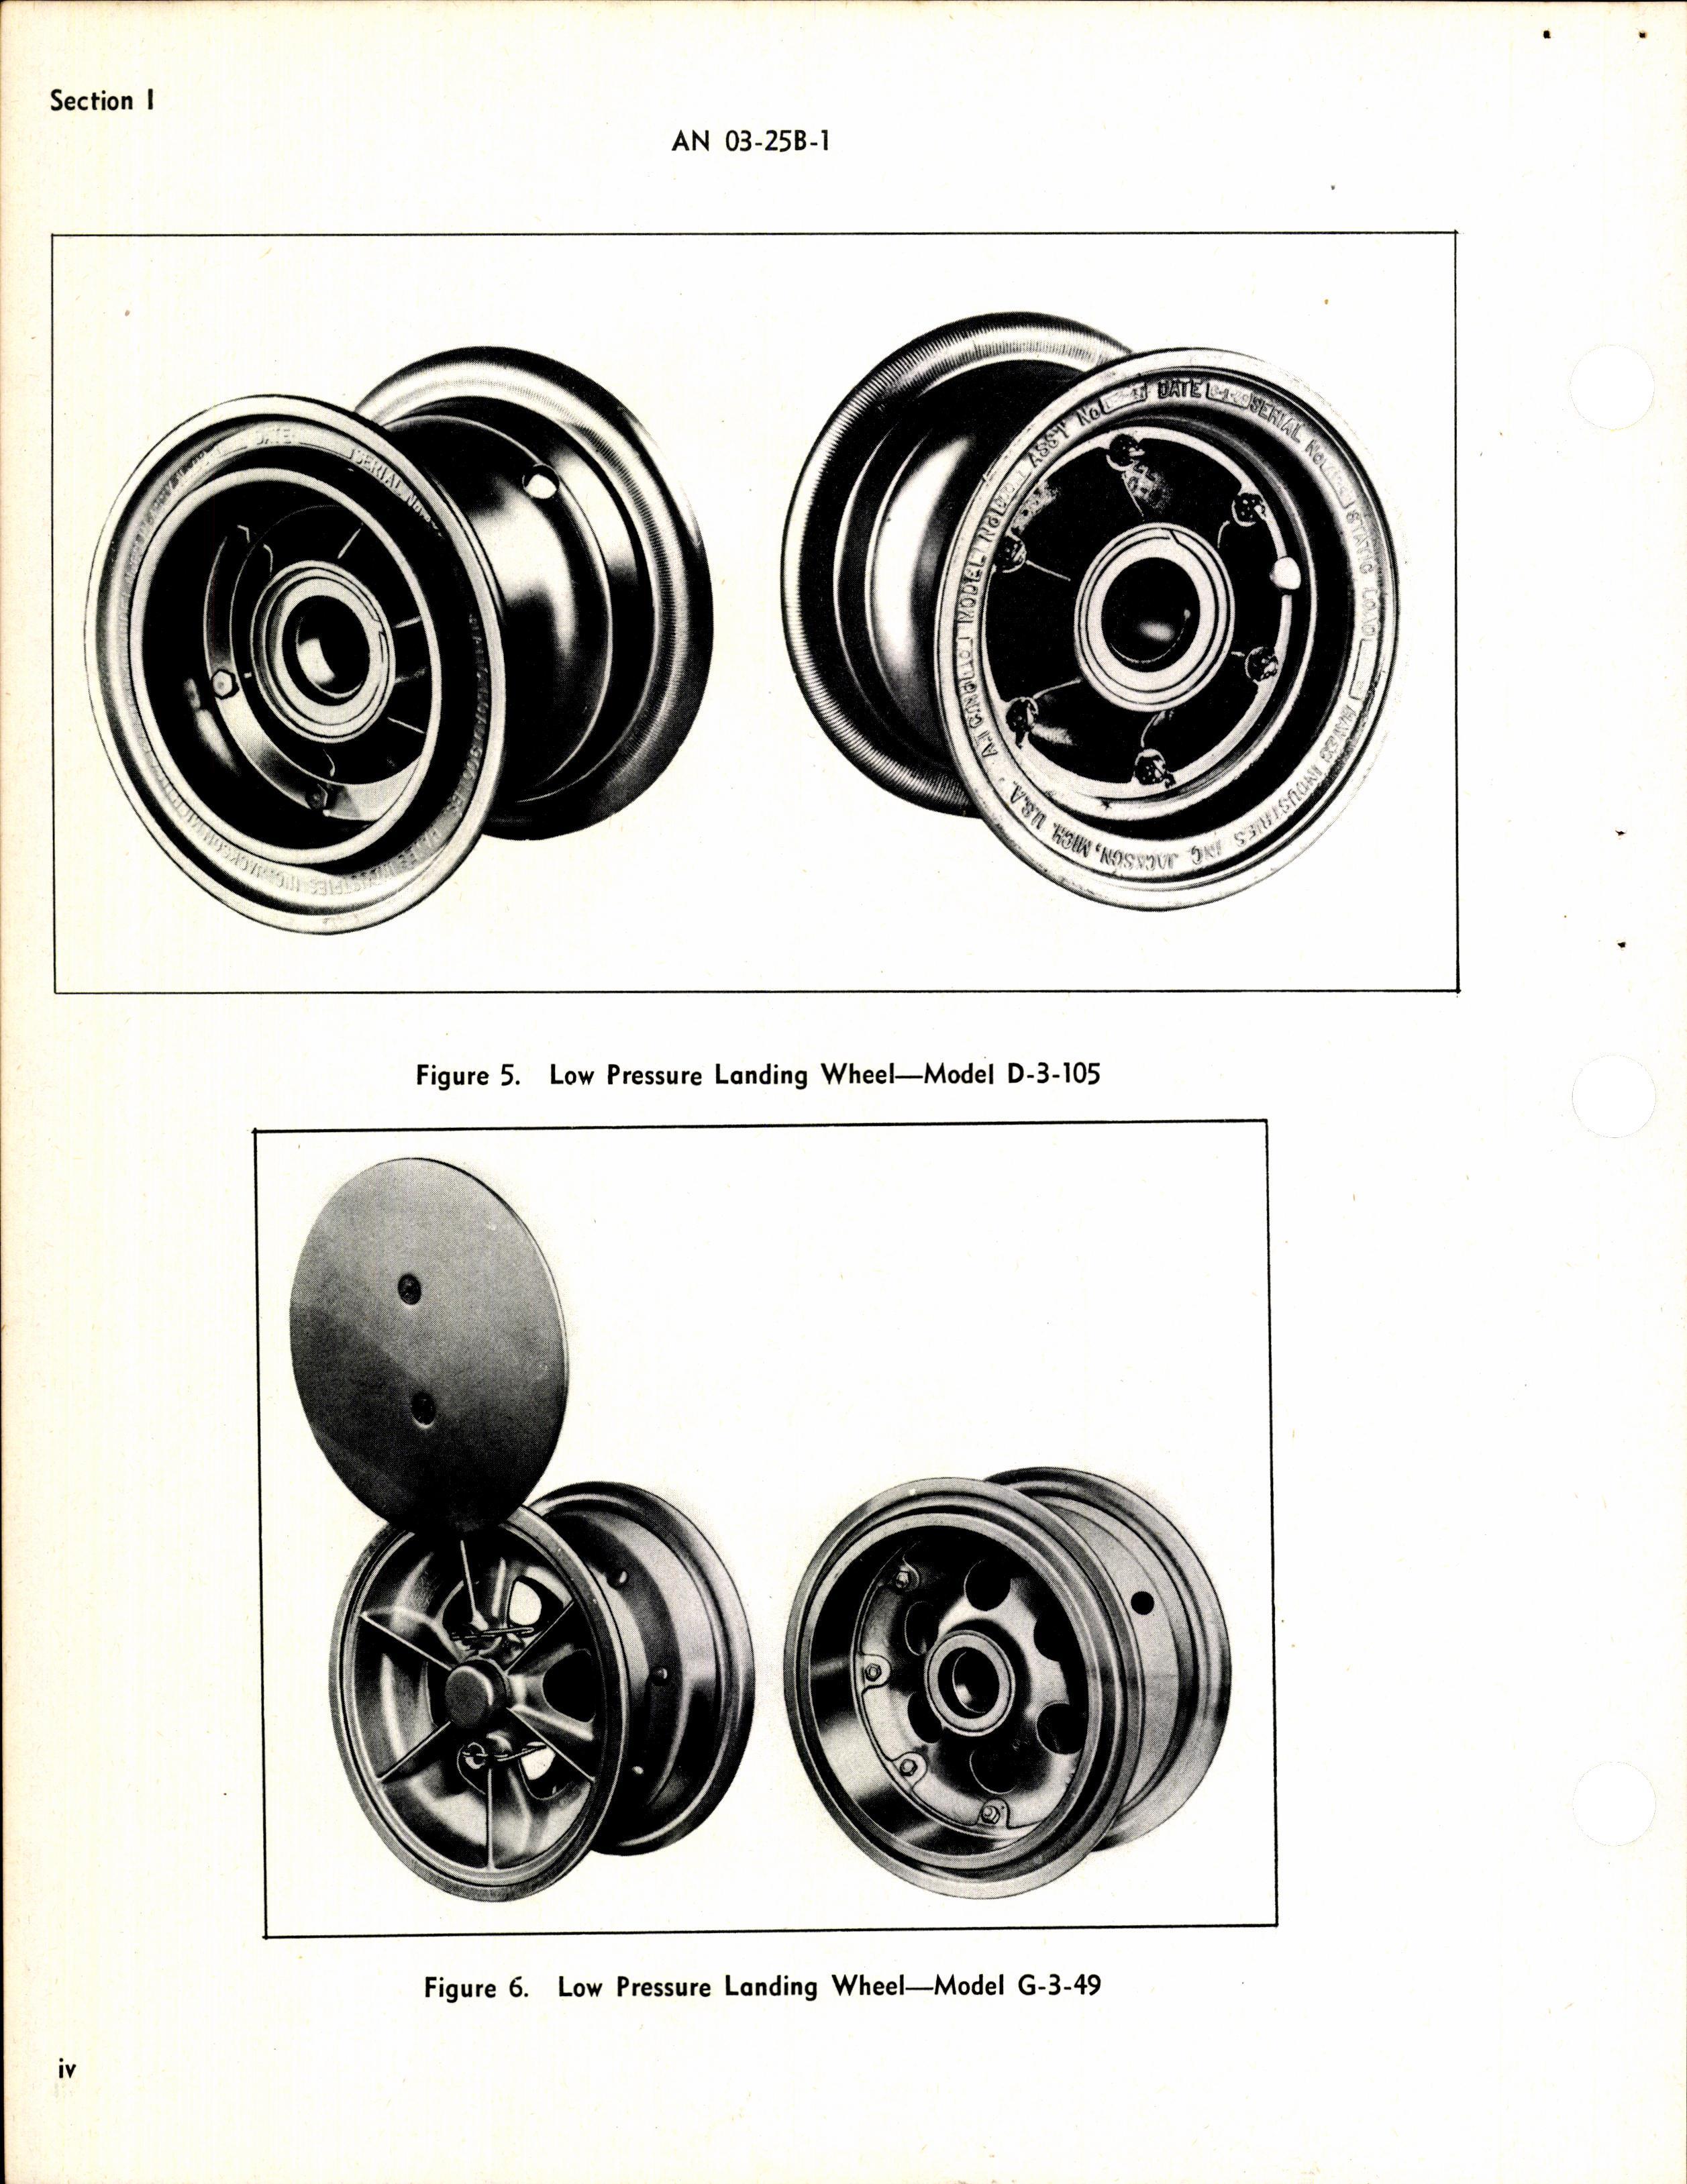 Sample page 6 from AirCorps Library document: Operation, Service, & Overhaul Instructions with Parts Catalog for Main Landing Wheels